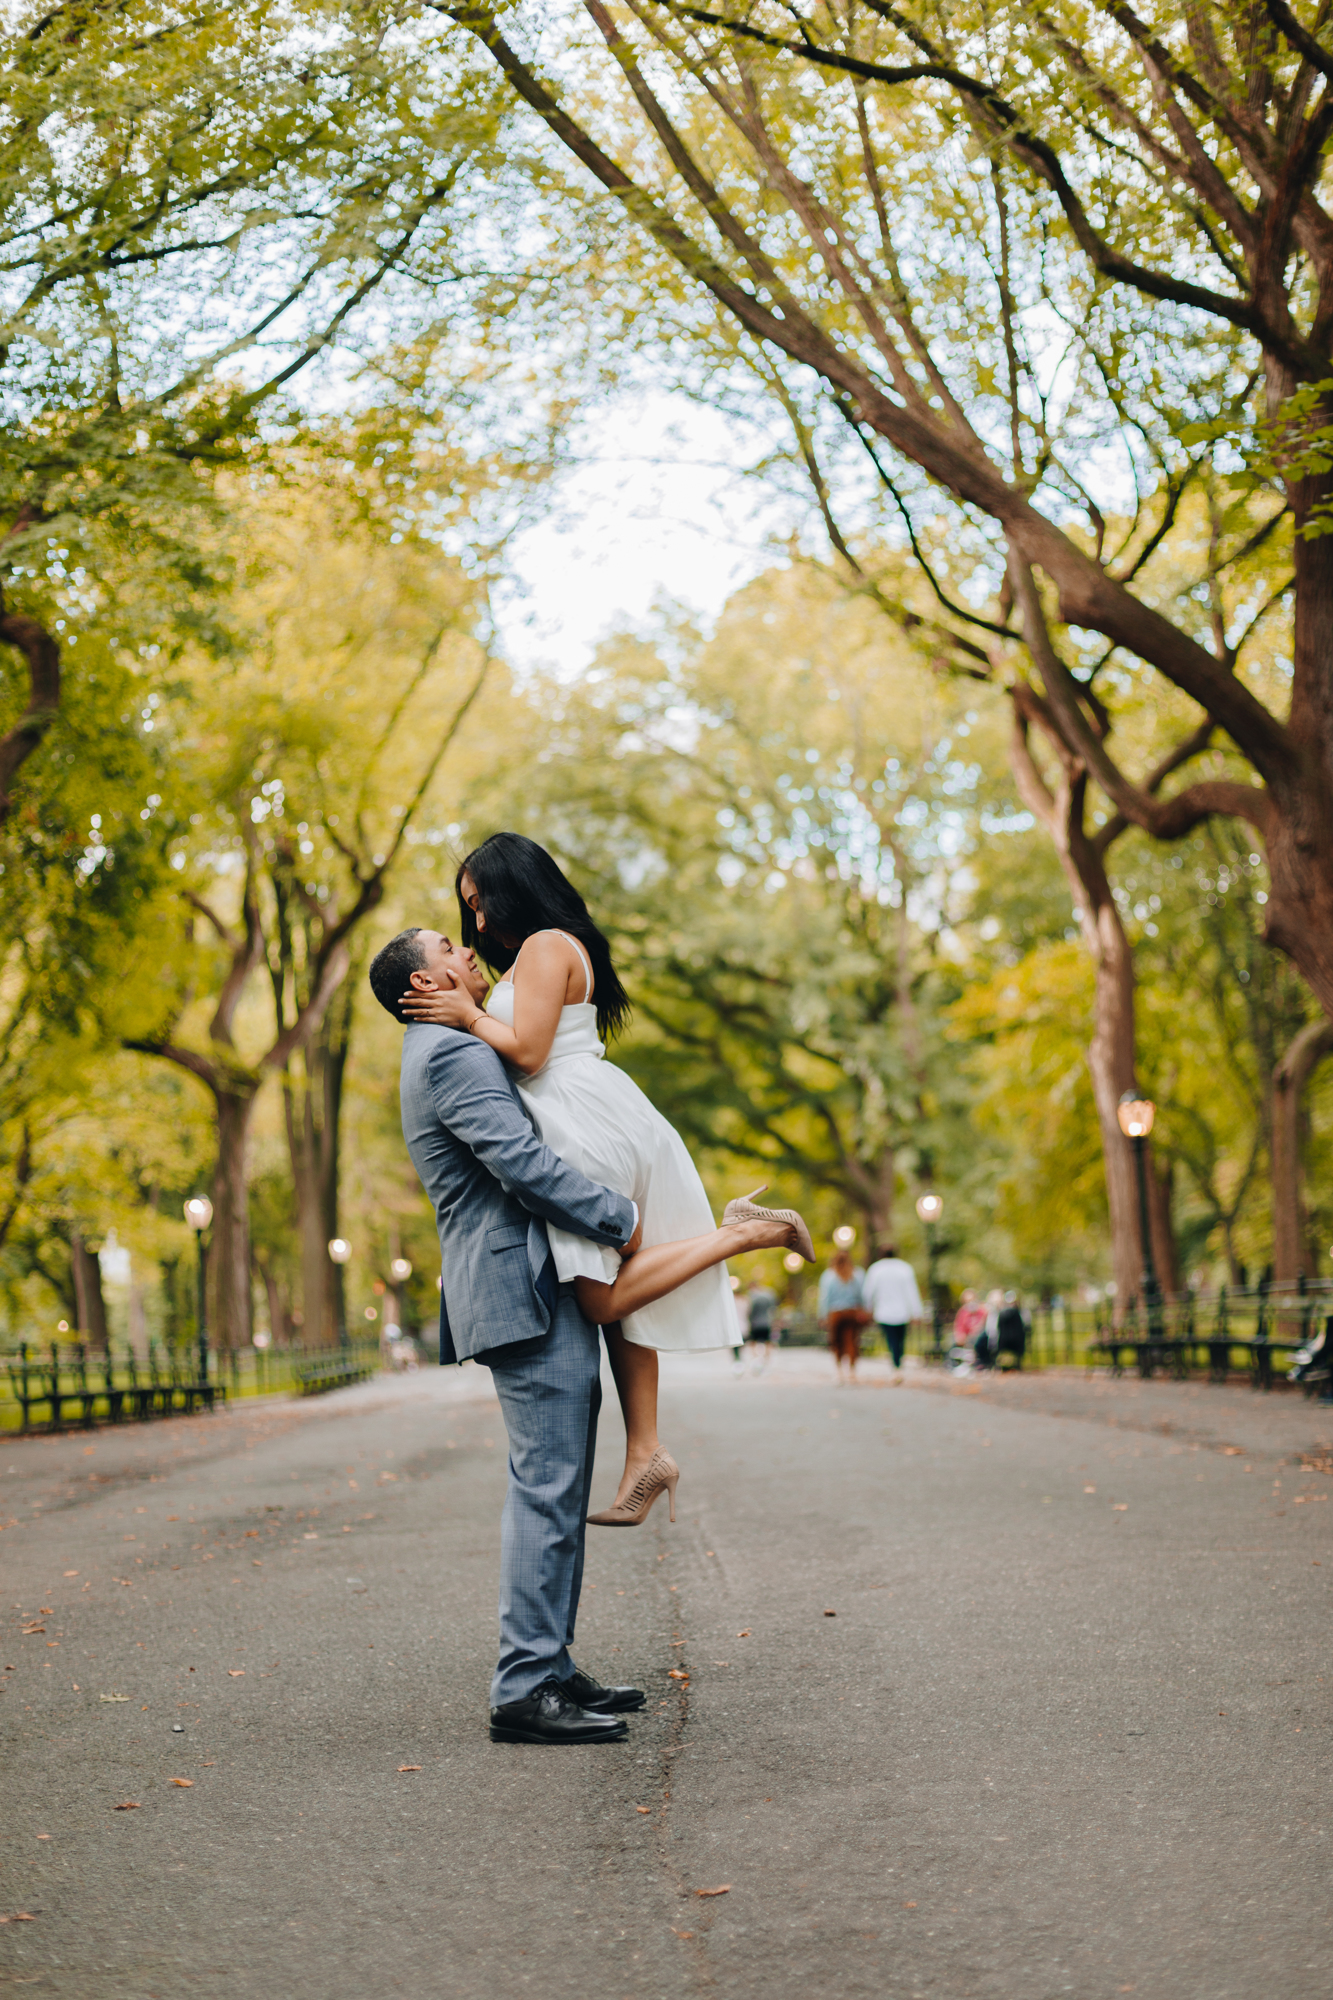 Best Restaurants to Eat at After a Candid Central Park Elopement